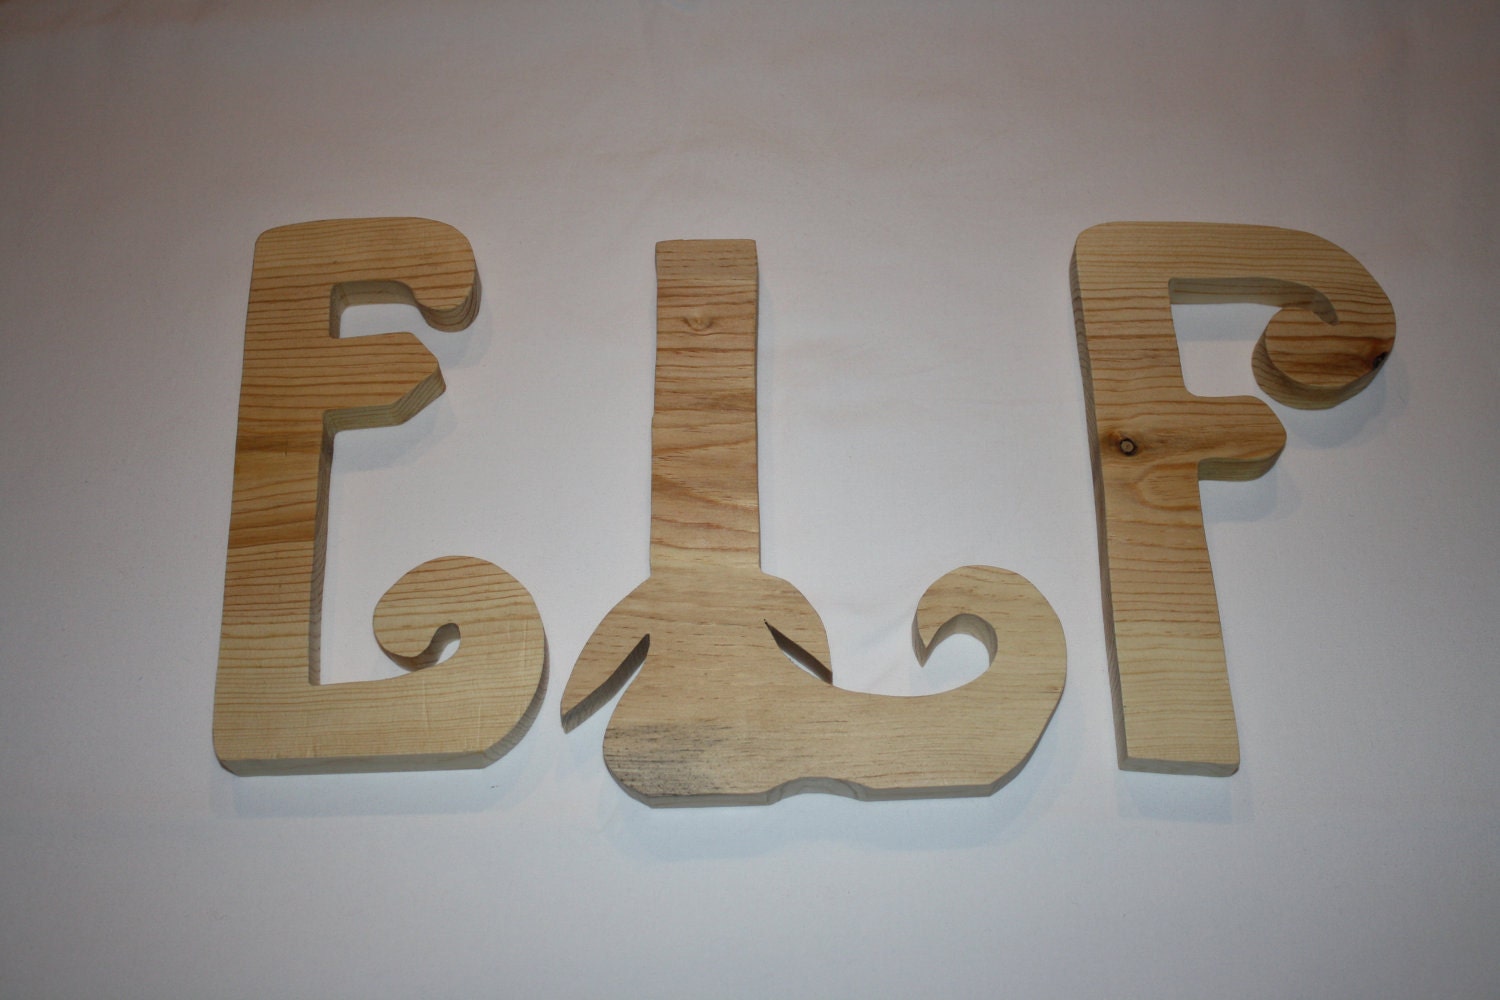 ELF unfinished wood letters sure to get you into the Christmas spirit